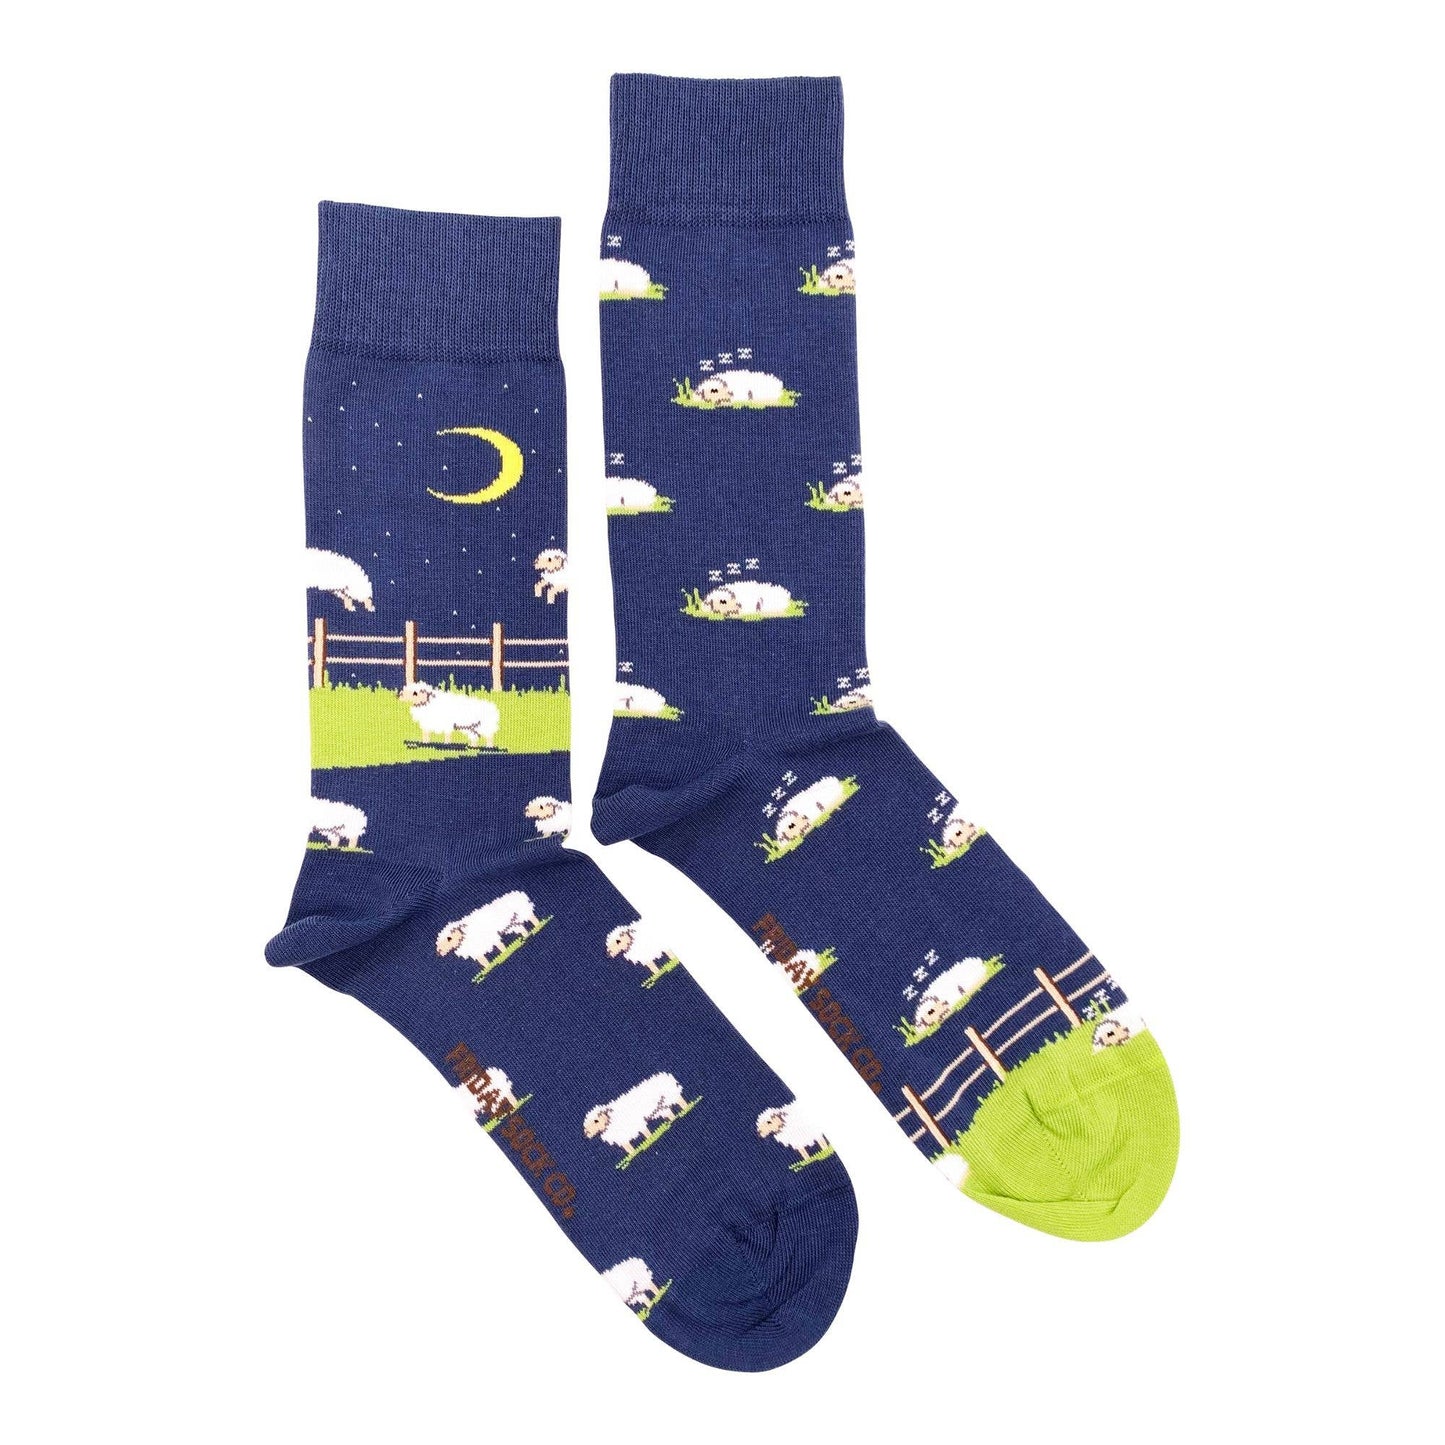 Silly Men's Socks | Jumping Sheep | Fun | Mismatched | Eco